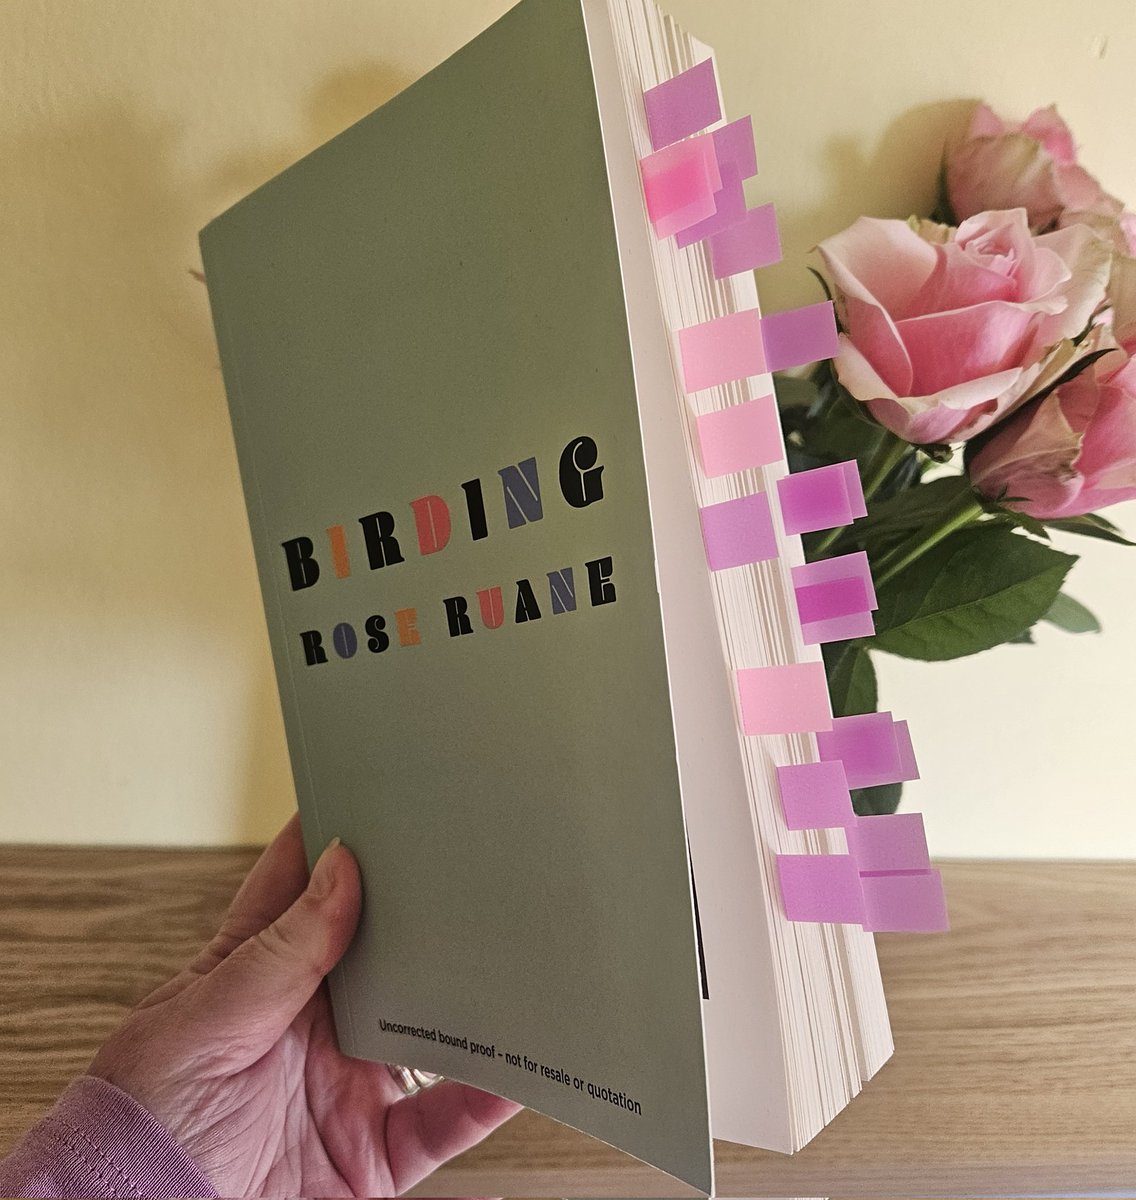 Often when I'm reading I'll tab a beautiful piece of writing or an idea Usually, that's a couple of tabs per book Look at the state of my proof copy of Birding though 😍 Poetic, insightful and so wise, I bloody adore this book Brava @regretteruane 👏🍦